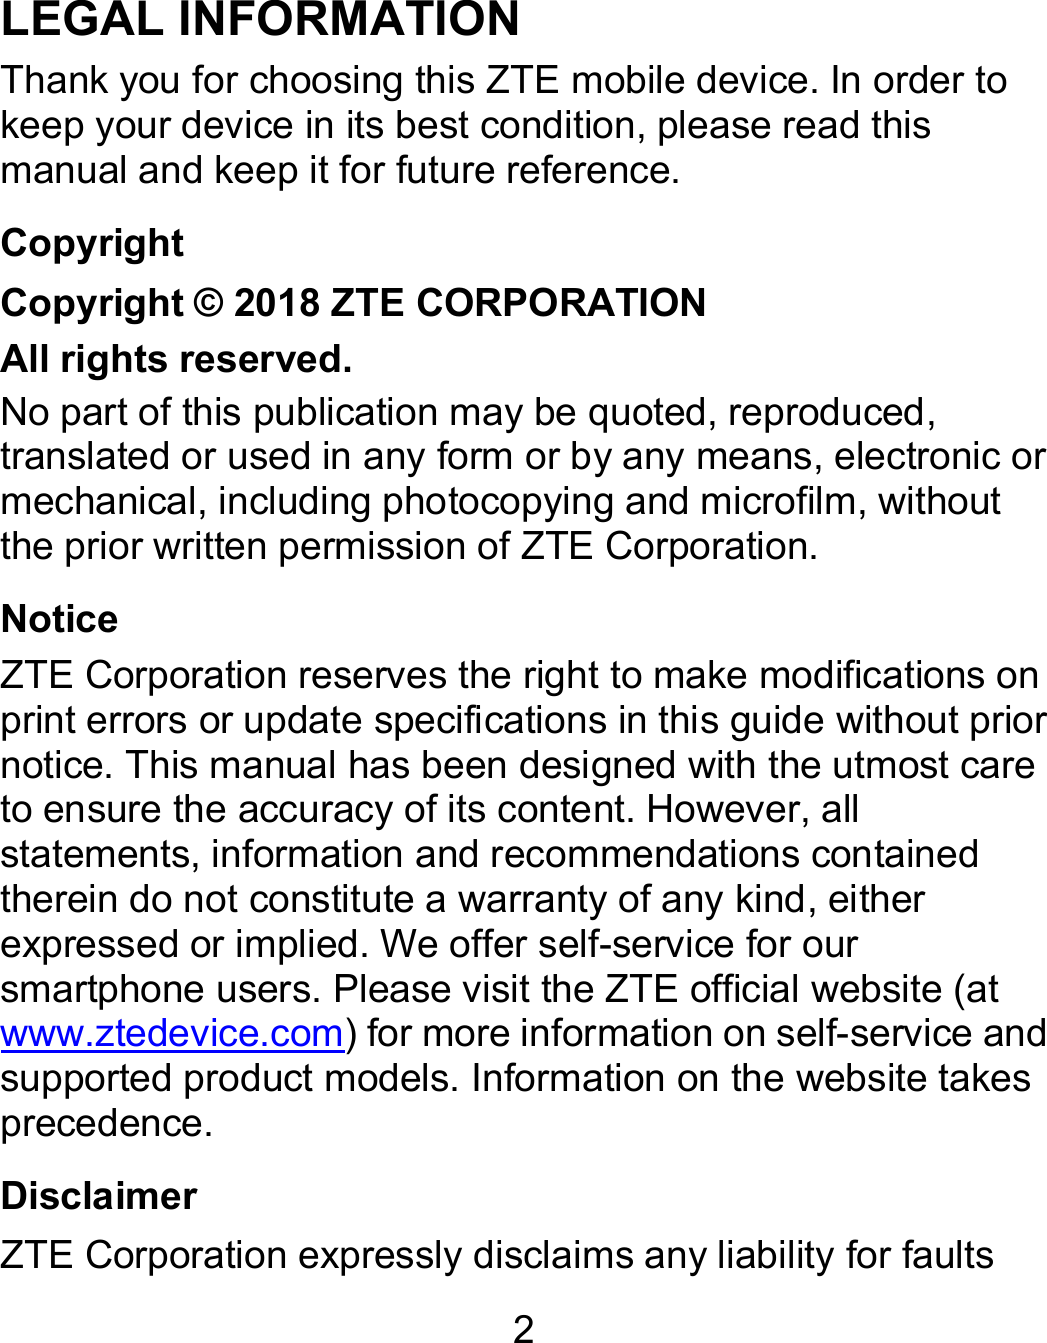 2 LEGAL INFORMATION Thank you for choosing this ZTE mobile device. In order to keep your device in its best condition, please read this manual and keep it for future reference. Copyright Copyright © 2018 ZTE CORPORATION All rights reserved. No part of this publication may be quoted, reproduced, translated or used in any form or by any means, electronic or mechanical, including photocopying and microfilm, without the prior written permission of ZTE Corporation. Notice ZTE Corporation reserves the right to make modifications on print errors or update specifications in this guide without prior notice. This manual has been designed with the utmost care to ensure the accuracy of its content. However, all statements, information and recommendations contained therein do not constitute a warranty of any kind, either expressed or implied. We offer self-service for our smartphone users. Please visit the ZTE official website (at www.ztedevice.com) for more information on self-service and supported product models. Information on the website takes precedence. Disclaimer ZTE Corporation expressly disclaims any liability for faults 